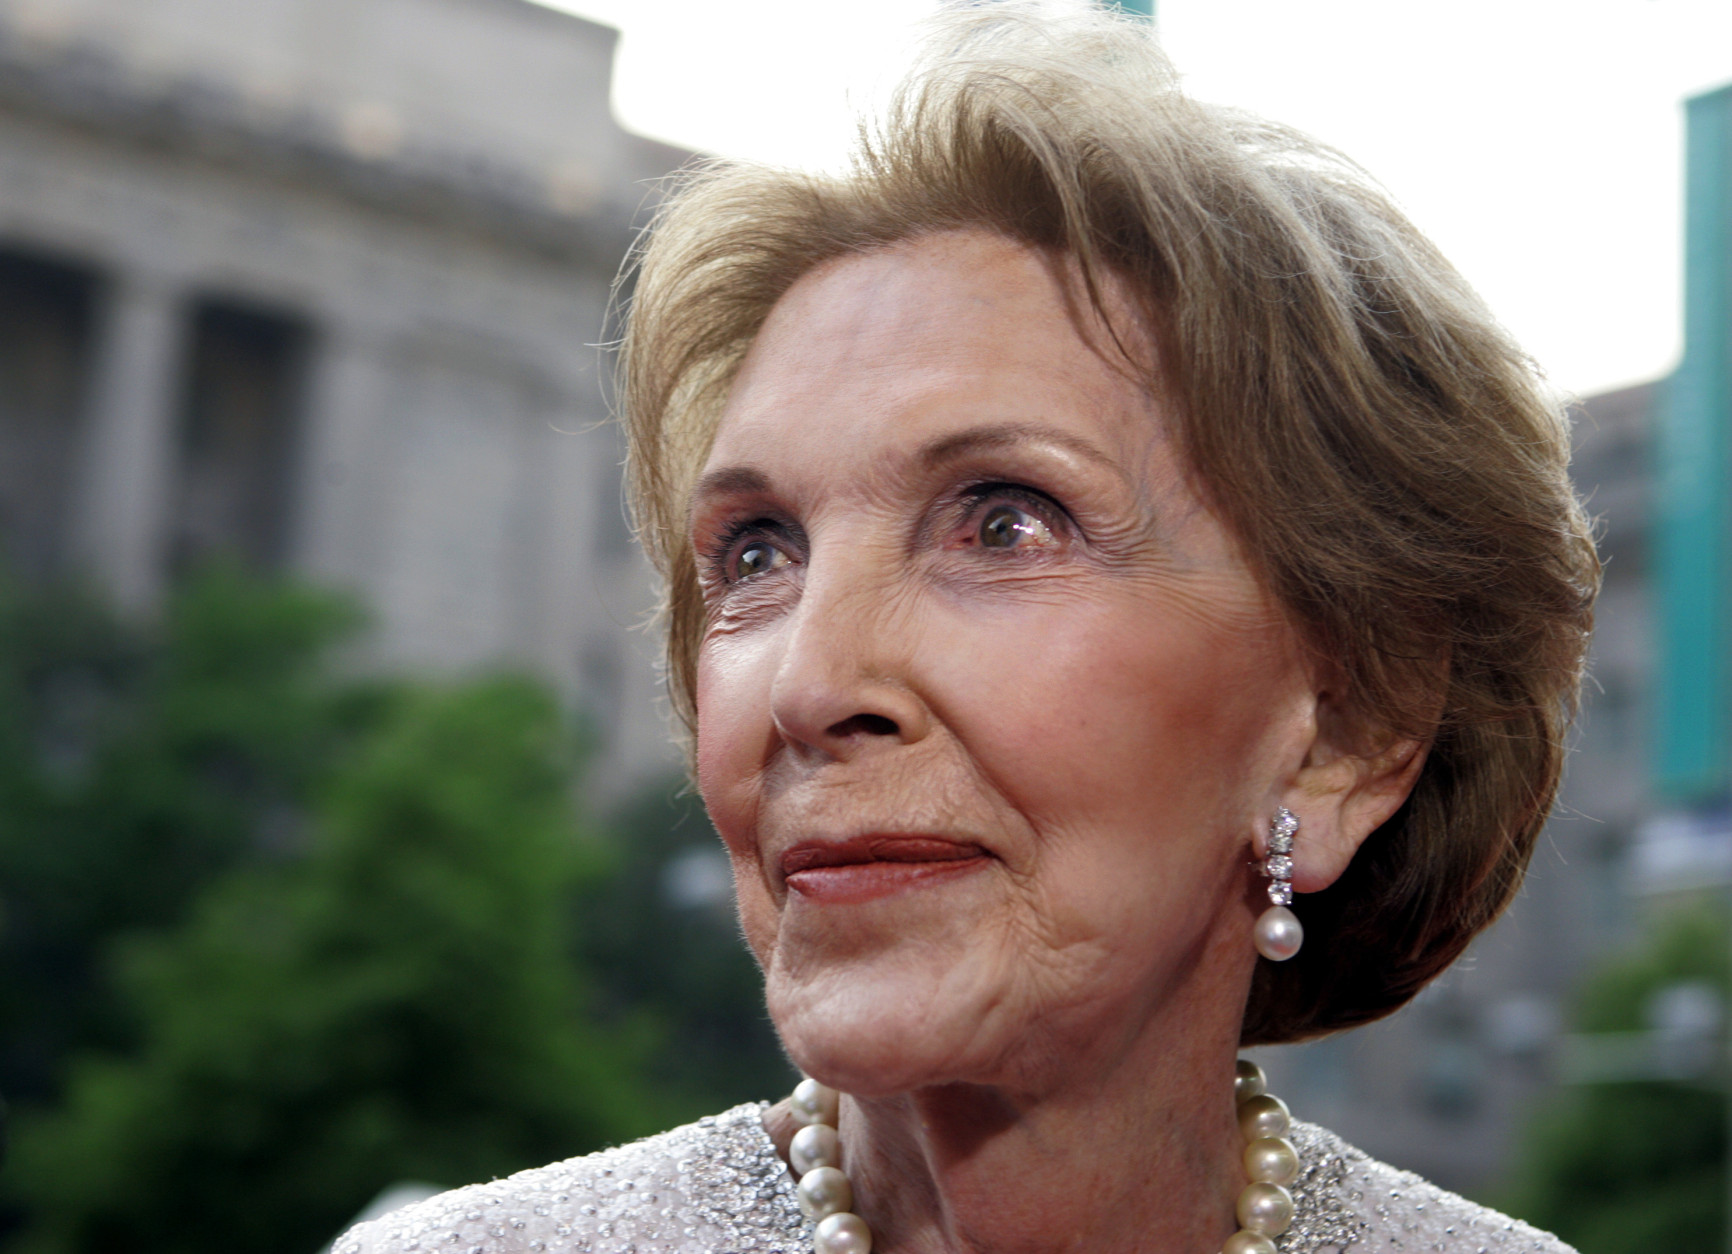 Former first lady Nancy Reagan arrives at Ronald Reagan building, Wednesday, May 11, 2005, in Washington. Mrs. Reagan made her first big public event Wednesday, since her husband's state funeral, in the building named after her husband.  (AP Photo/Manuel Balce Ceneta)